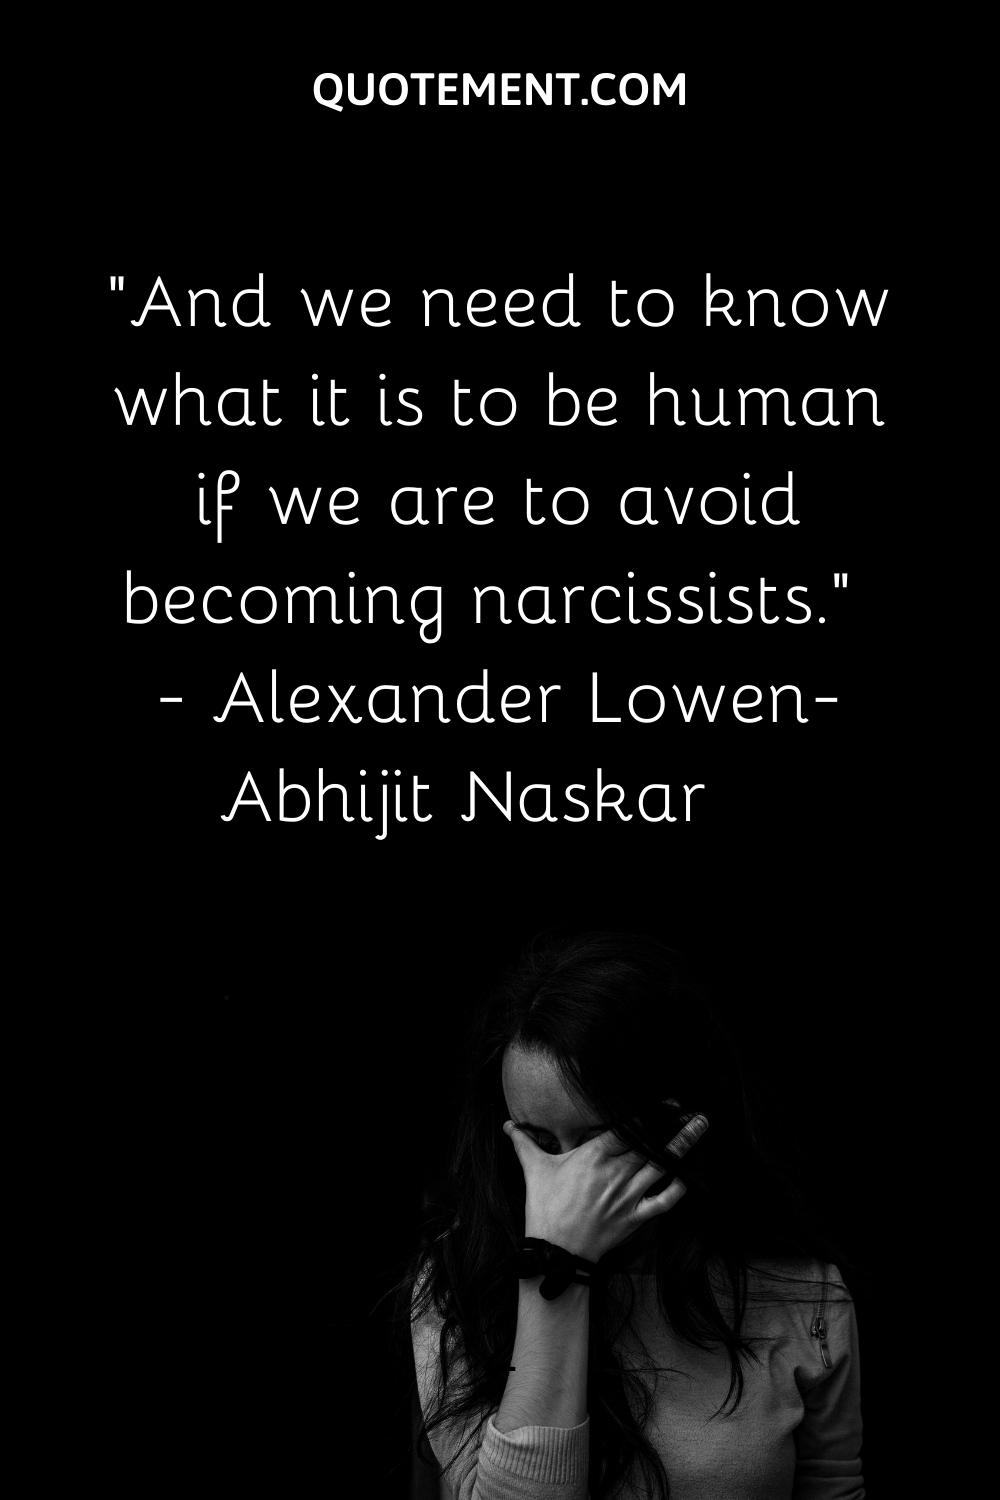 And we need to know what it is to be human if we are to avoid becoming narcissists